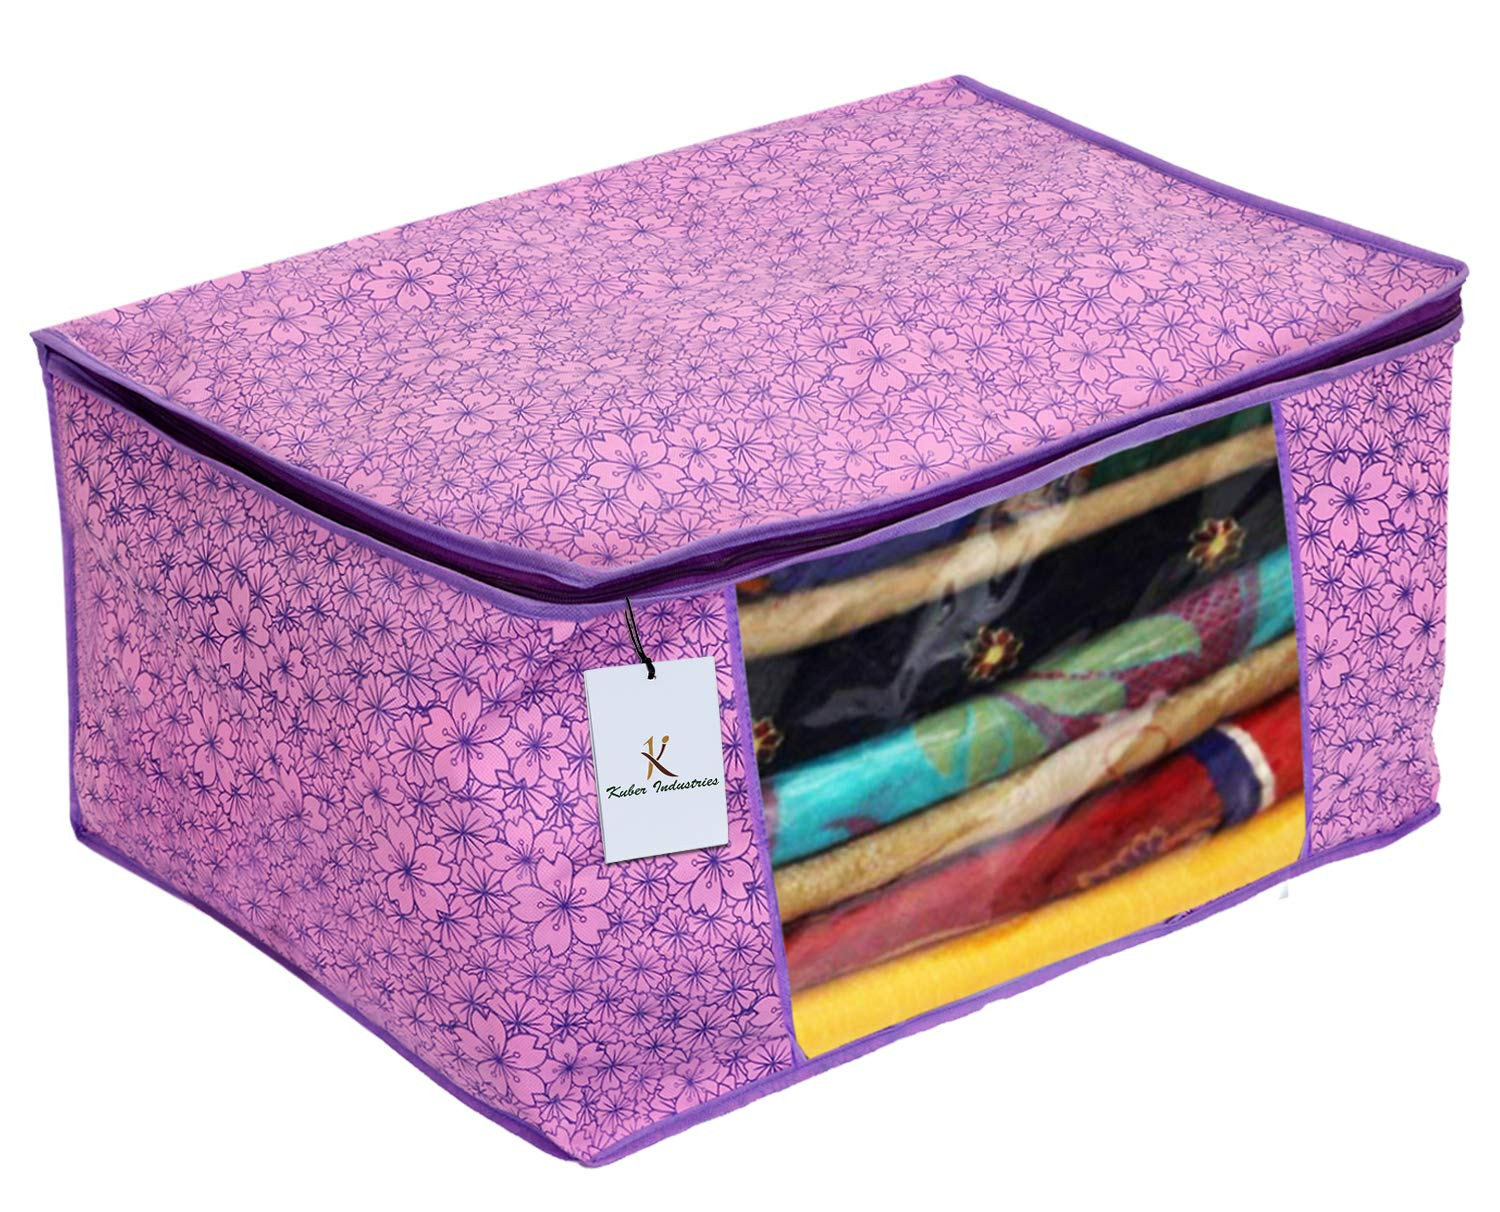 Kuber Industries Metalic Printed Non Woven Fabric Saree Cover Set with Transparent Window, Extra Large, Pink Purple & Golden Brown & Beige -CTKTC40801